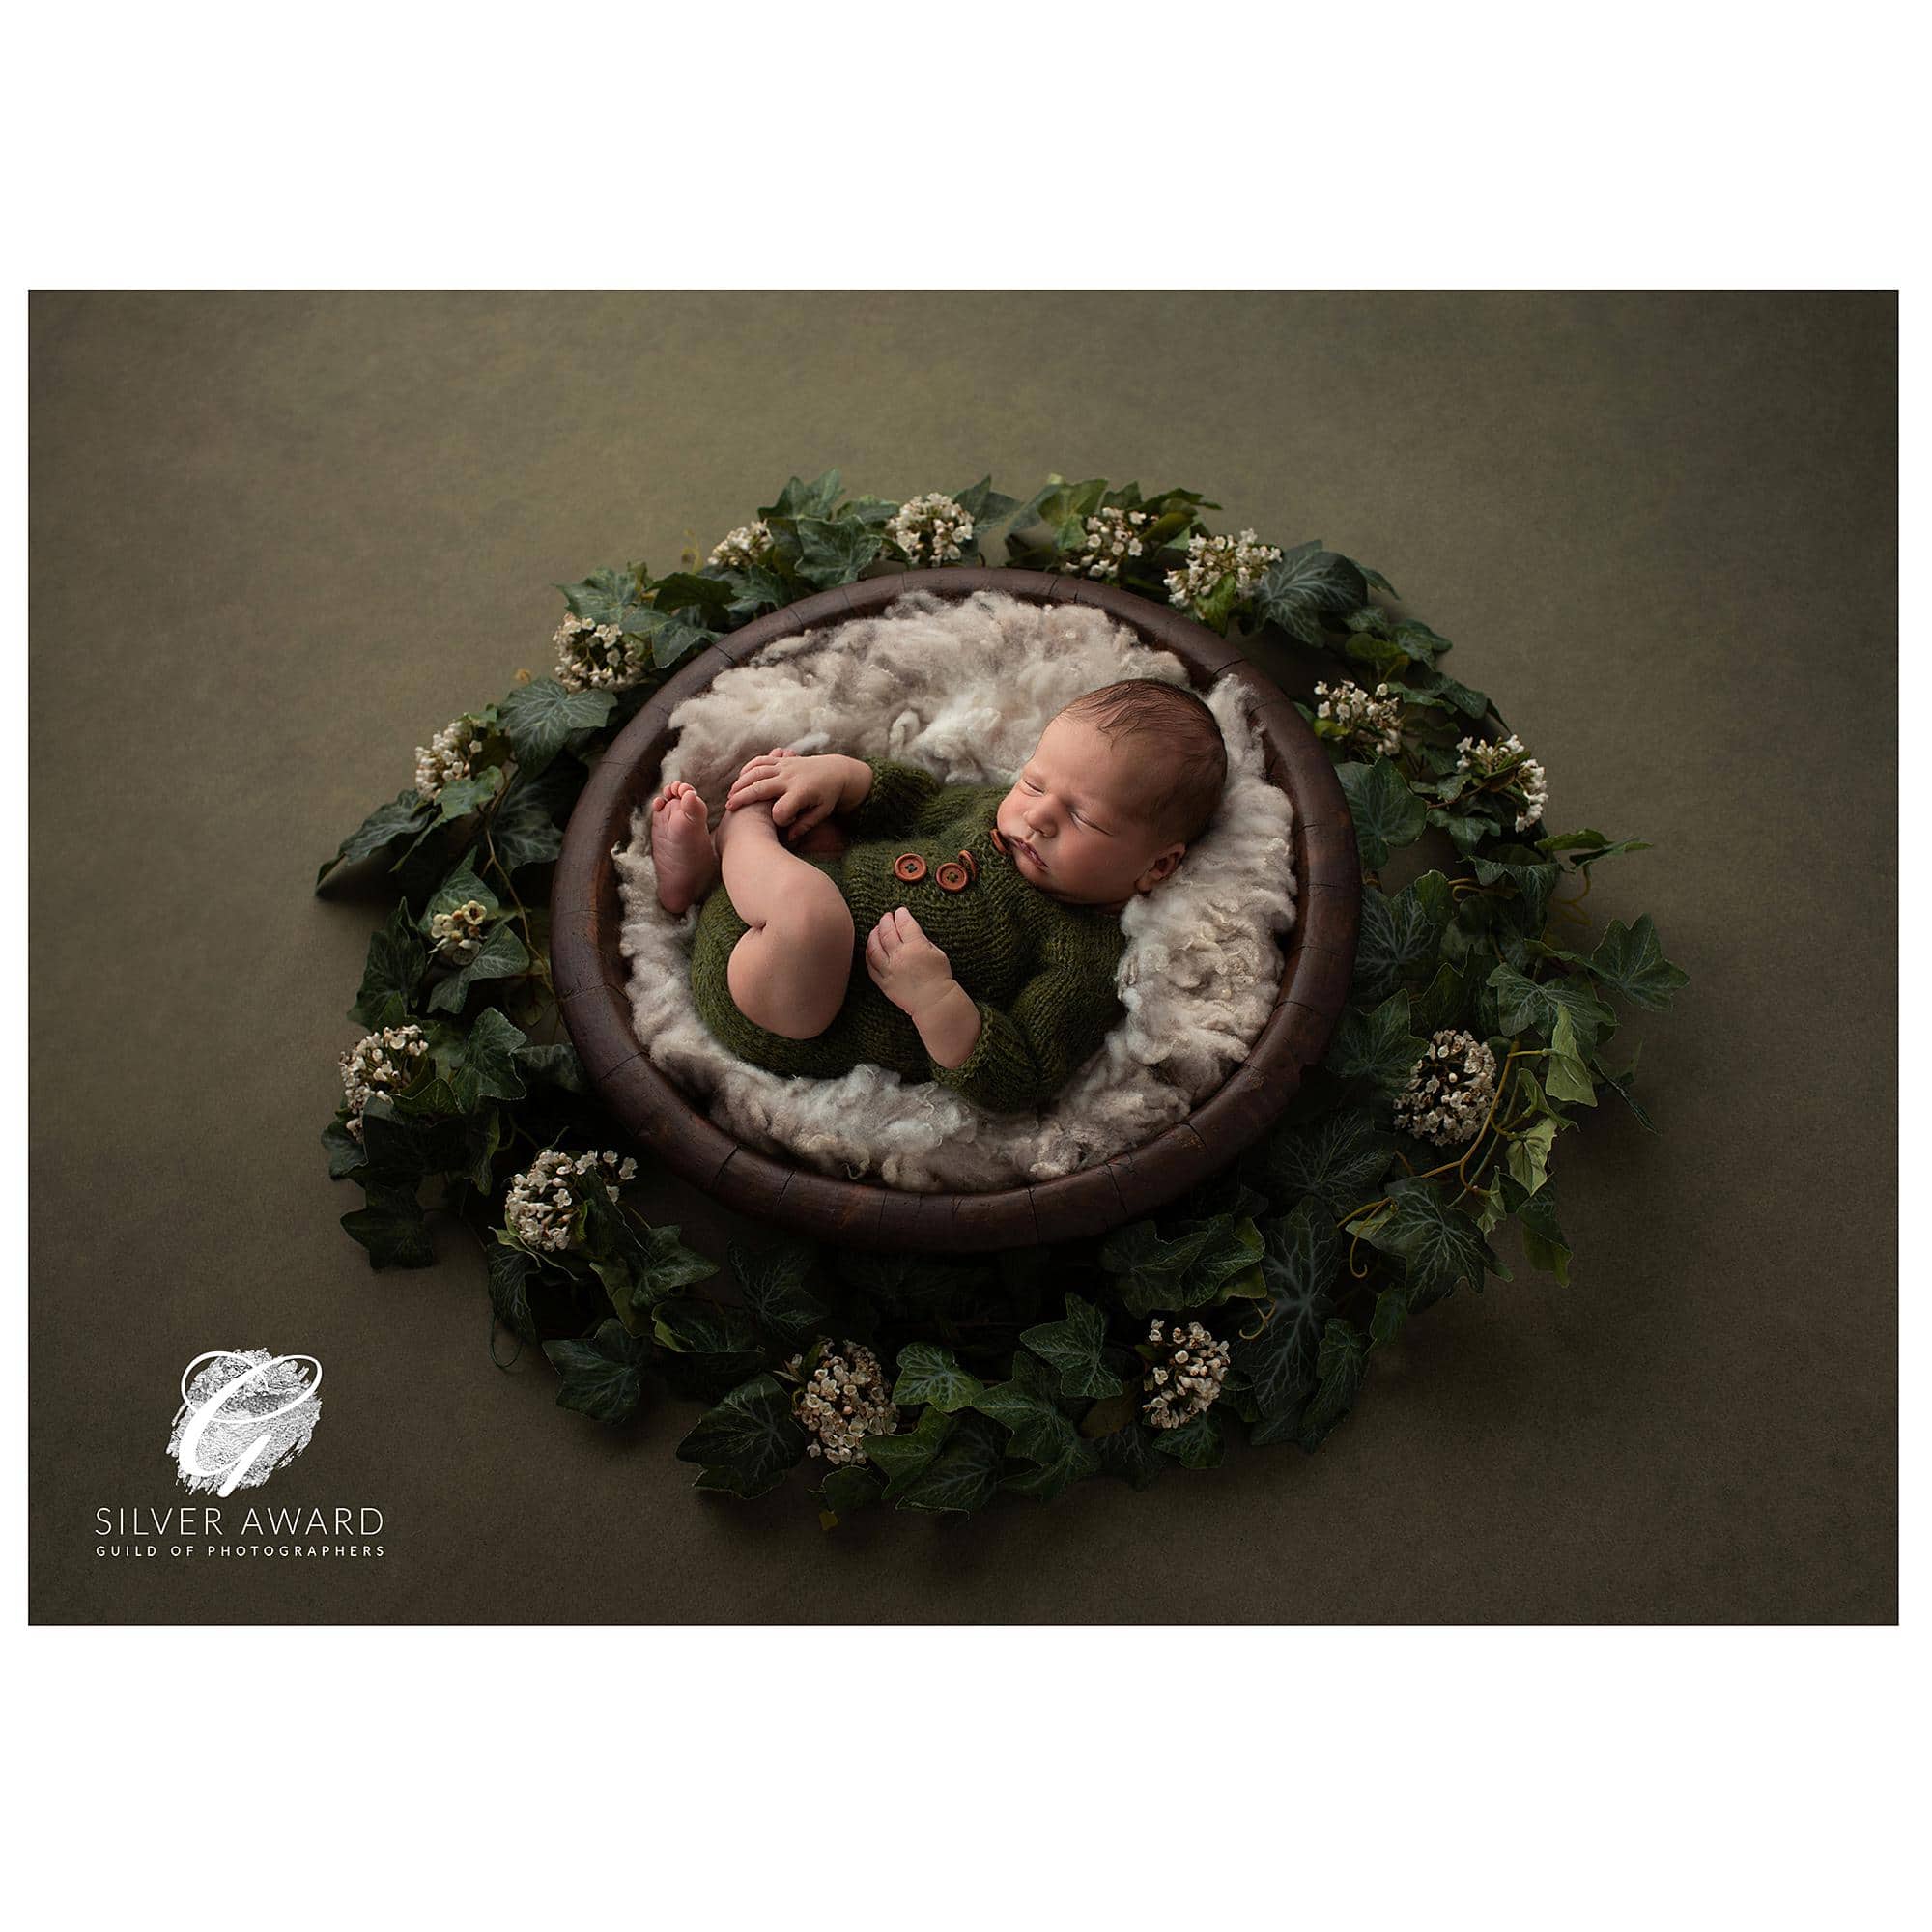 Photograph of a newborn baby in a wooden bowl on an olive backdrop wins a Silver Award at the Portrait Masters